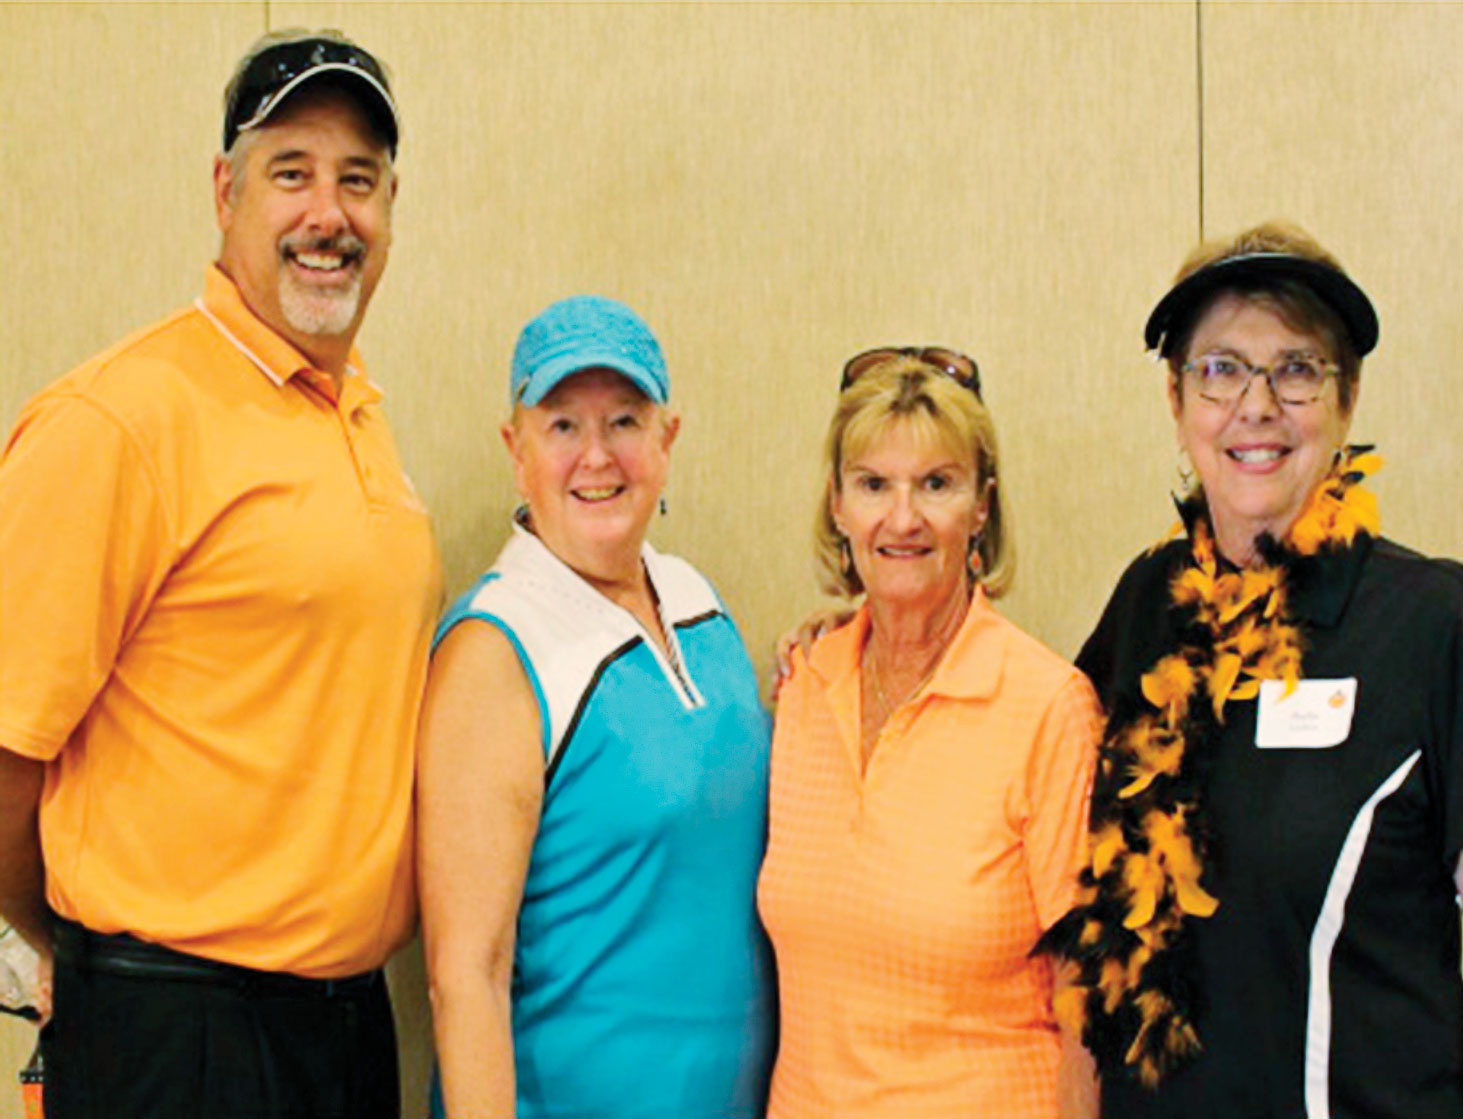 First place team (left to right): Sponsor Nova Home Loans Sean Wood, guests Debbie Ogle and Gail Fosmire and MPLN member Phyllis Cadden; photo courtesy of Holly Riviere